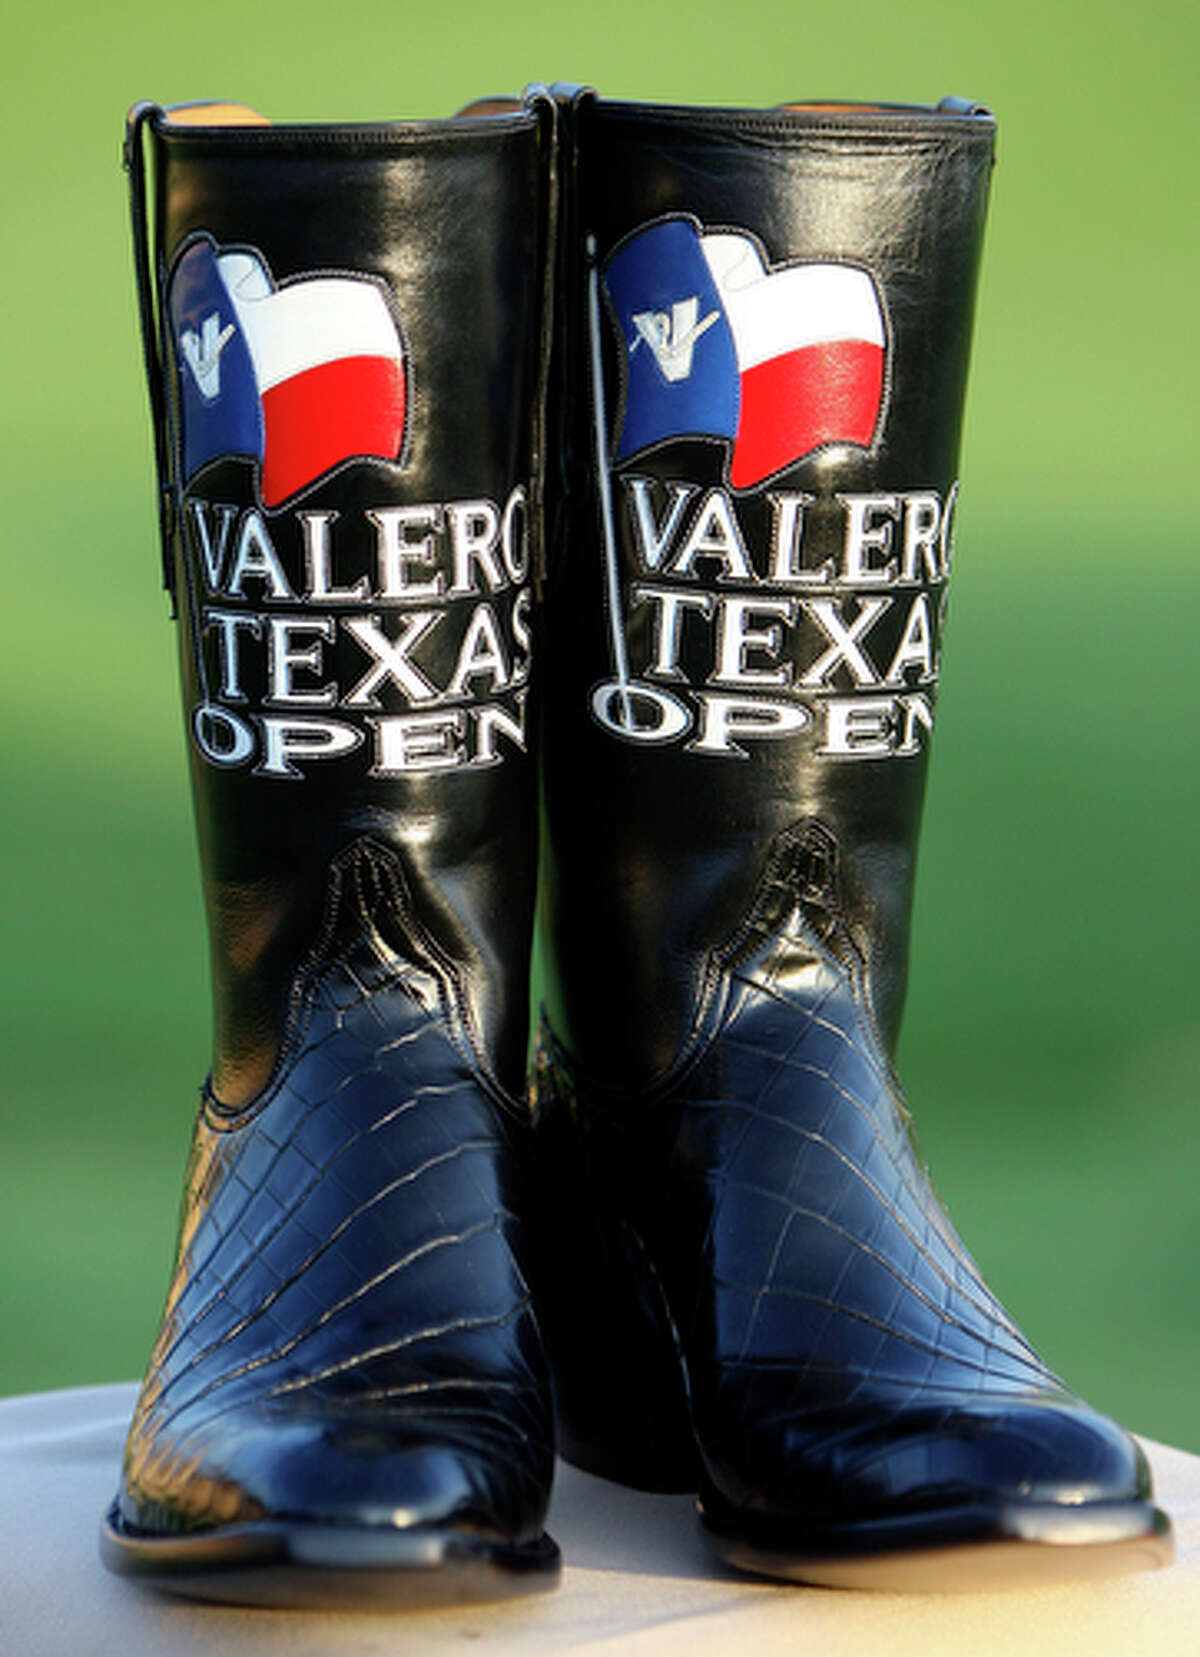 A pair of boots presented to Adam Scott, from Queensland, Australia, for winning the Valero Texas Open.